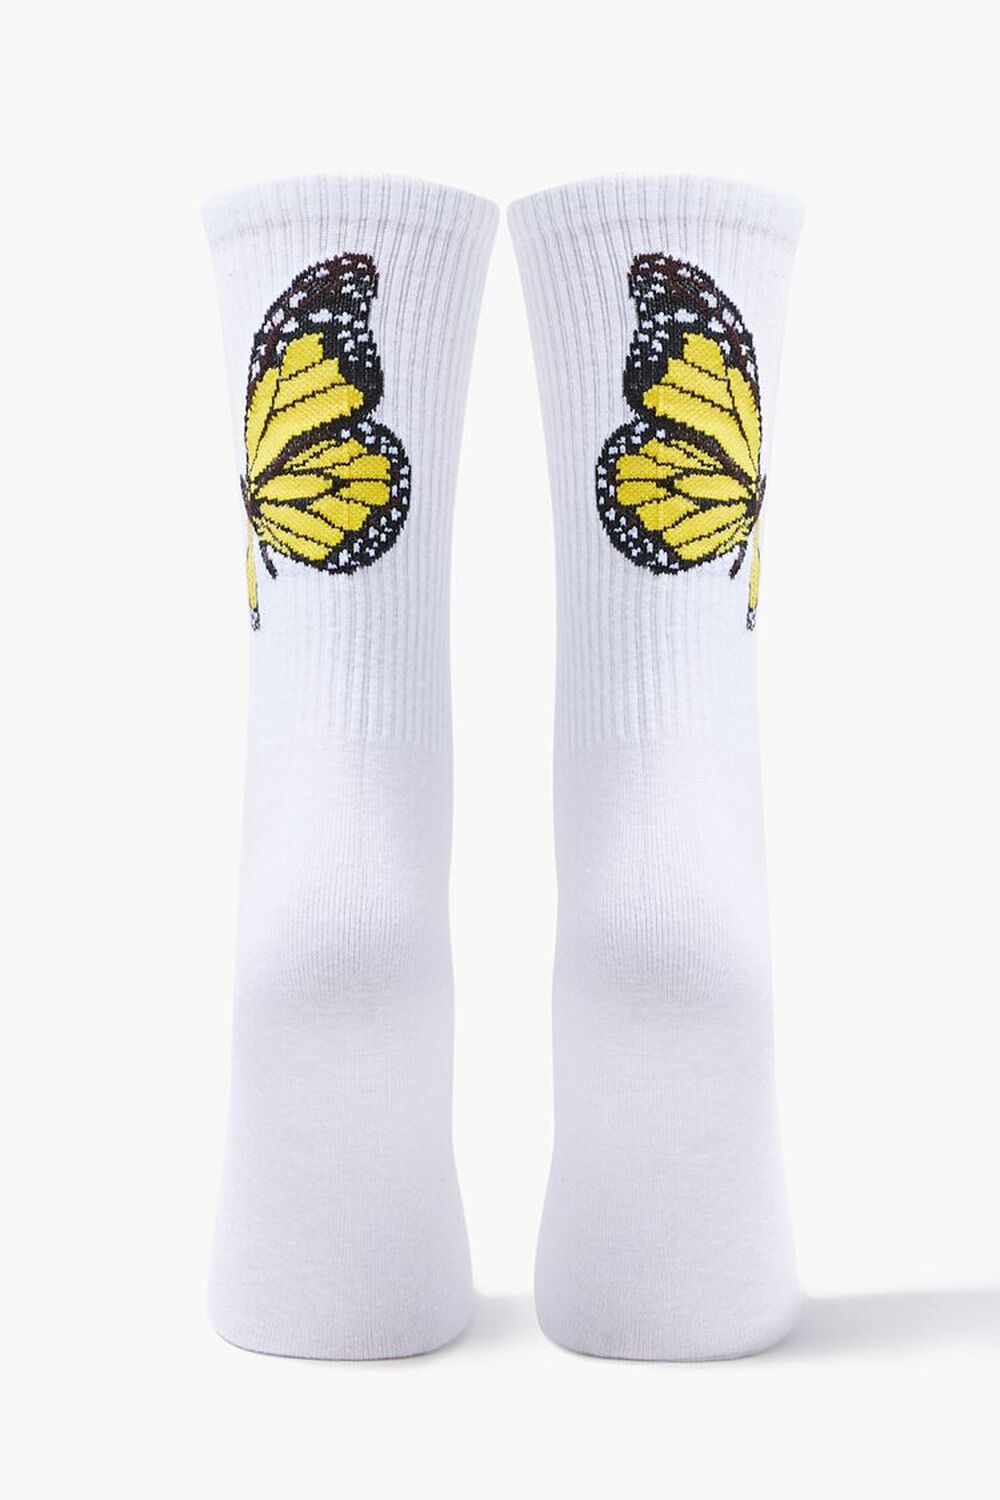 WHITE/YELLOW Butterfly Graphic Crew Socks, image 3